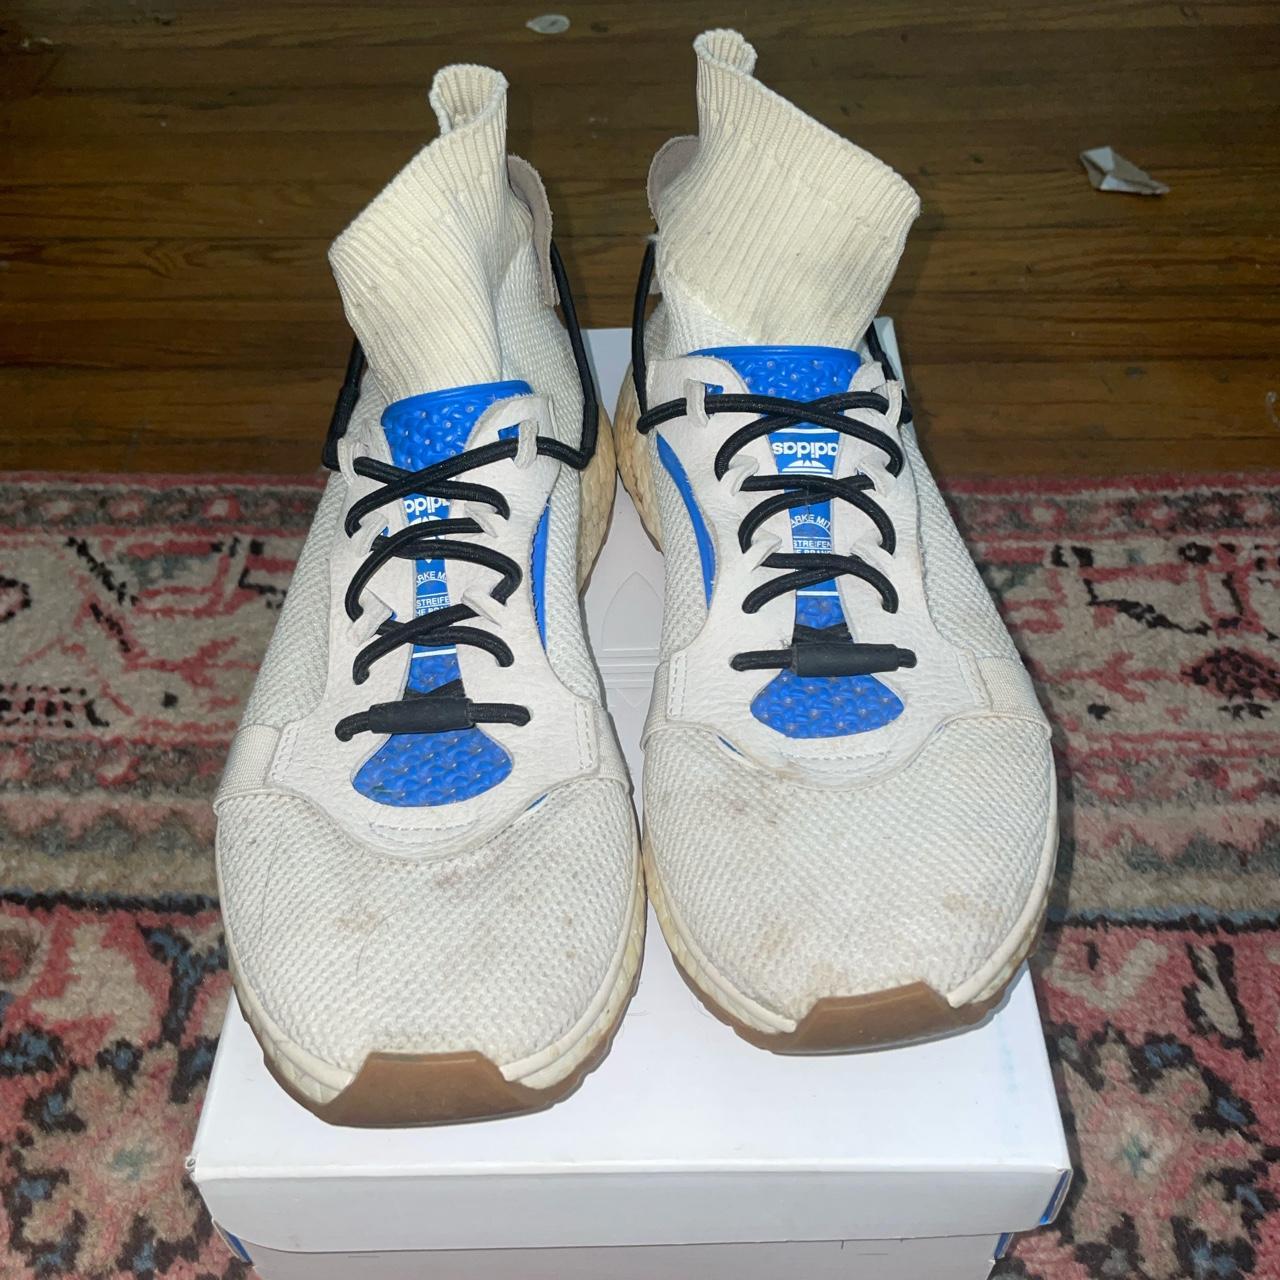 Alexander Wang Men's White and Blue Trainers (2)